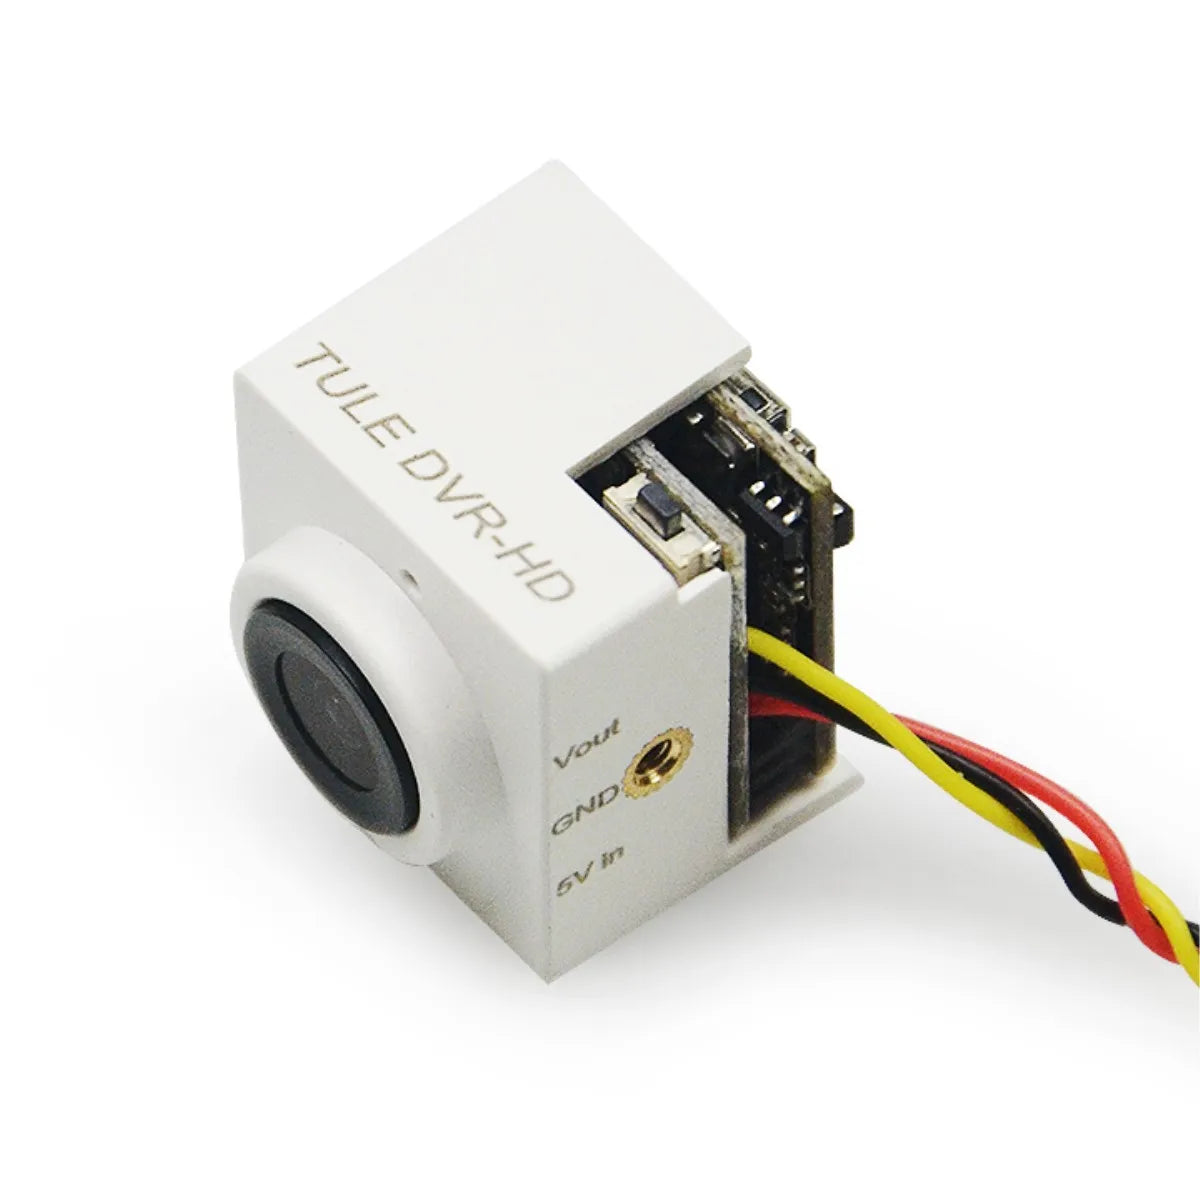 TULE 720P 170 Wide Angle Micro Mini Camera, red indicates that the camera is recording